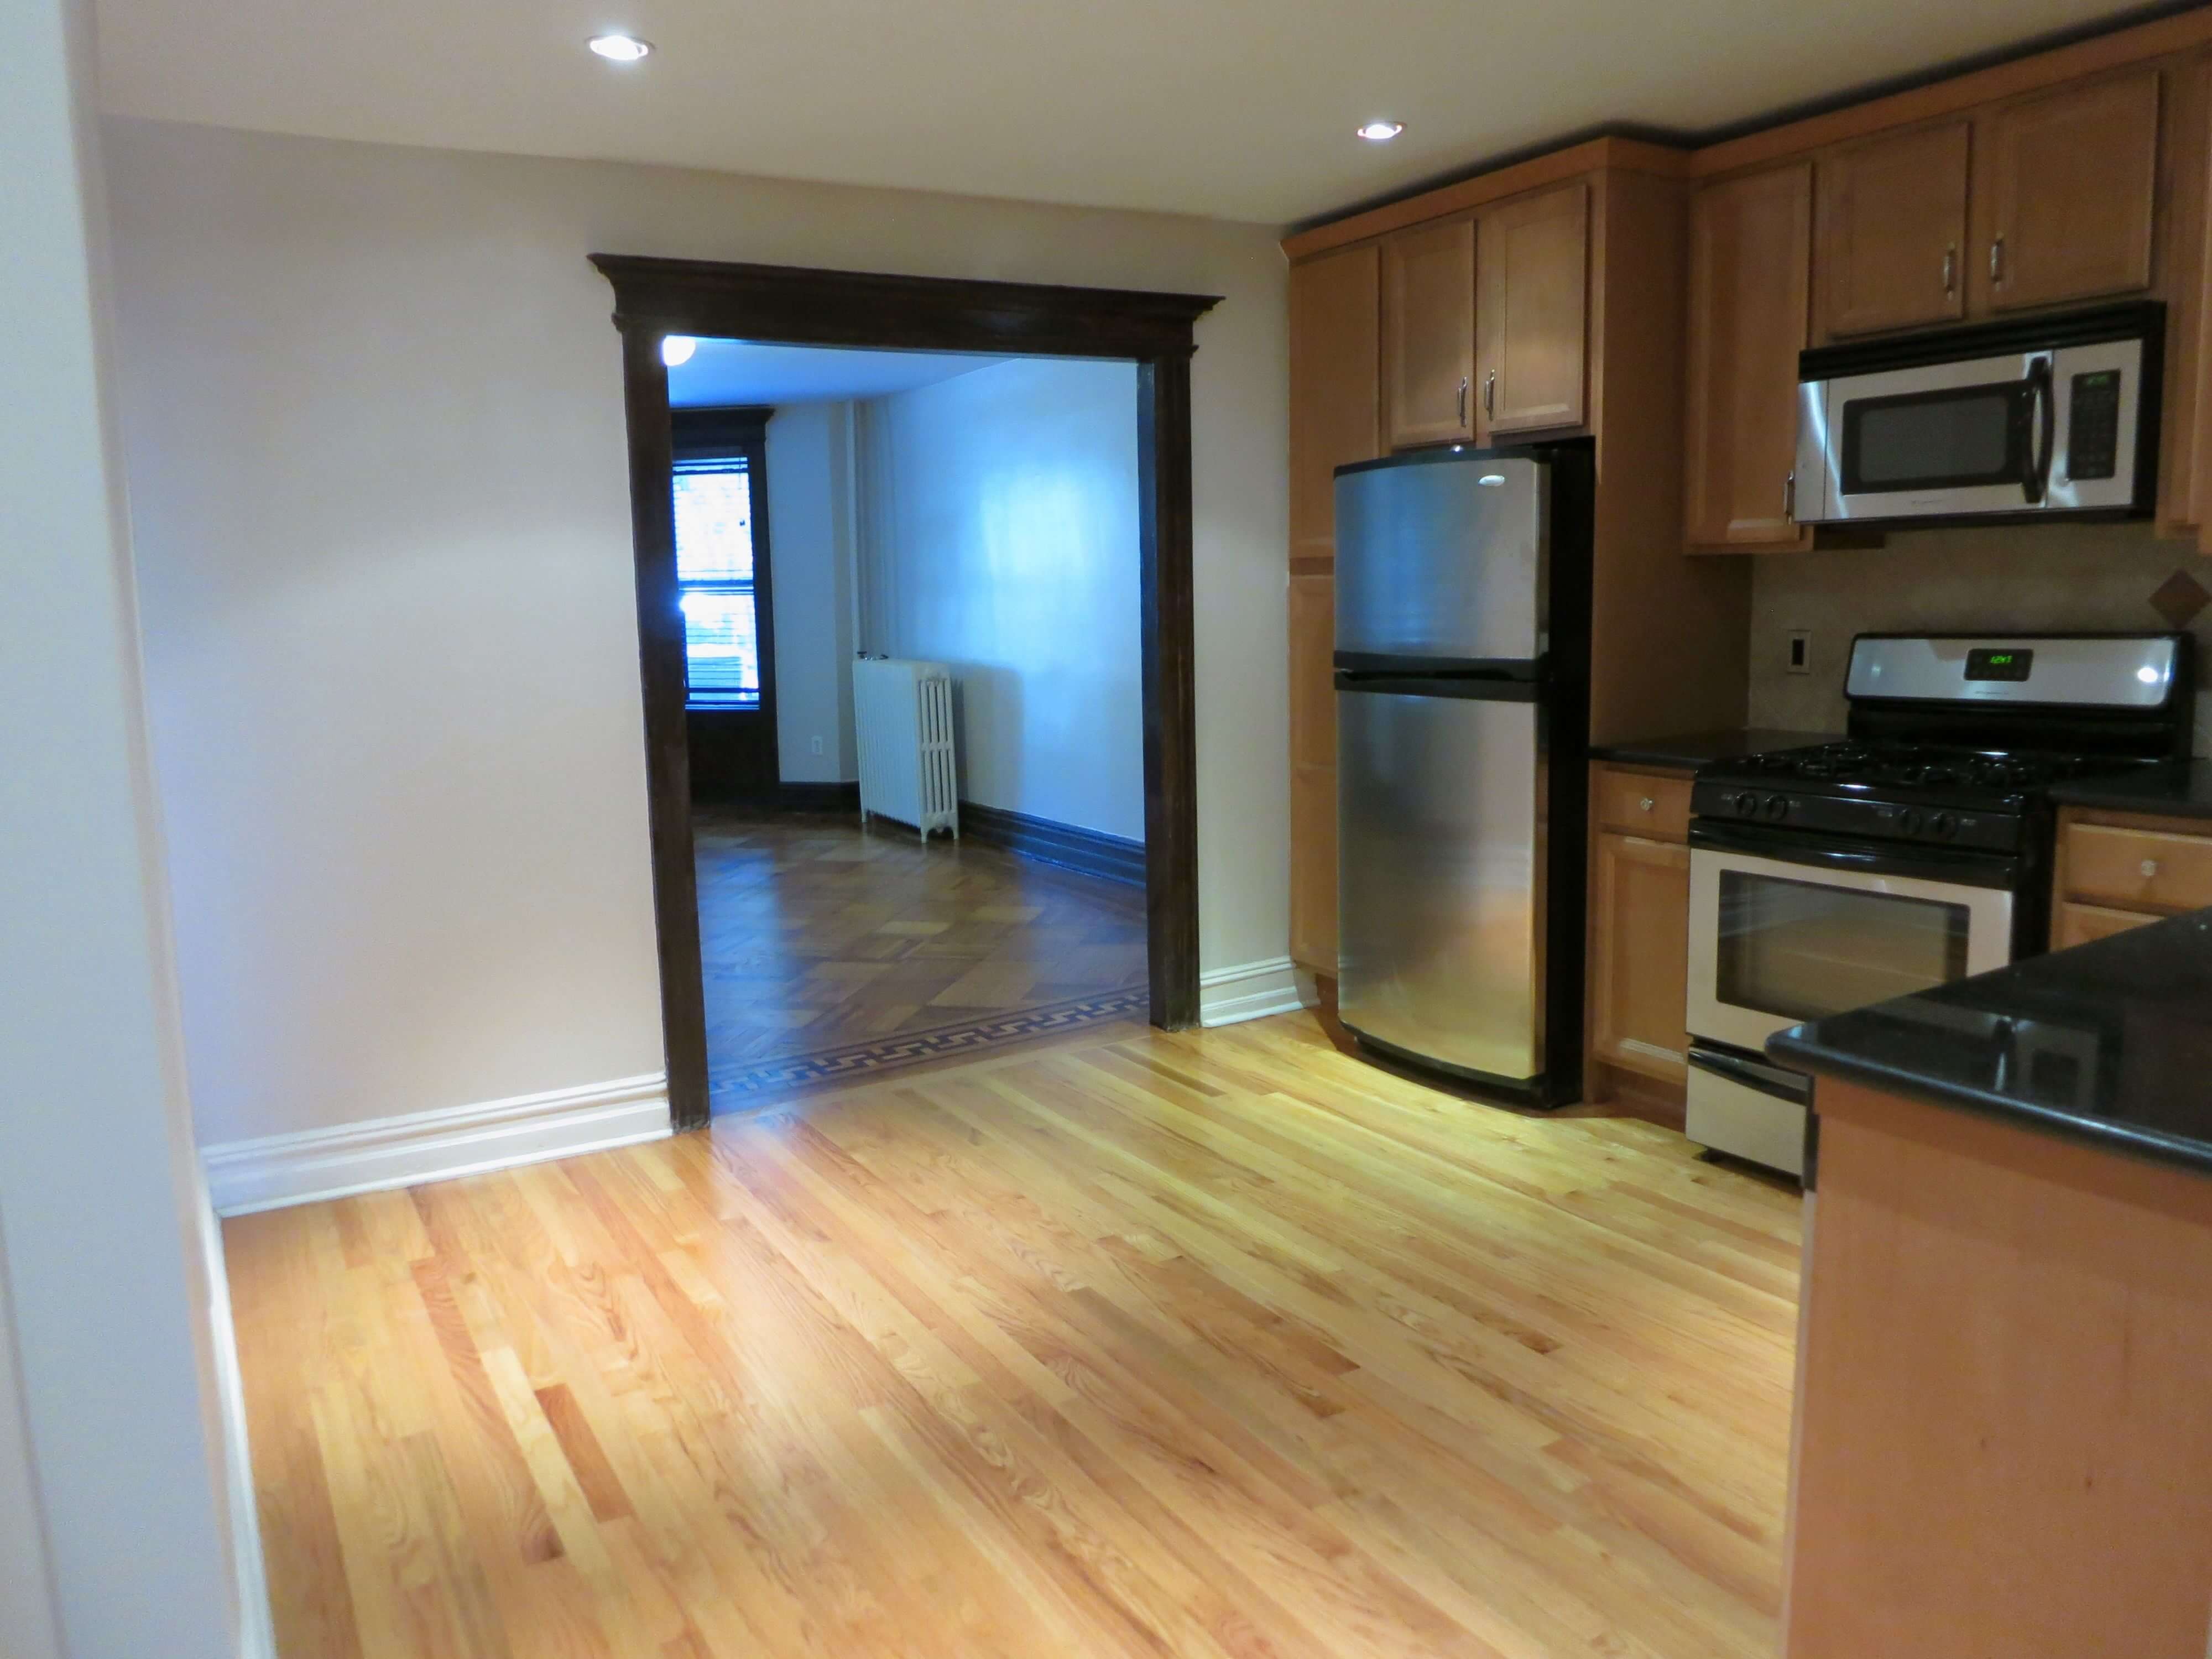 Brooklyn Apartments for Rent in Kensington at 236 E. 5th Street